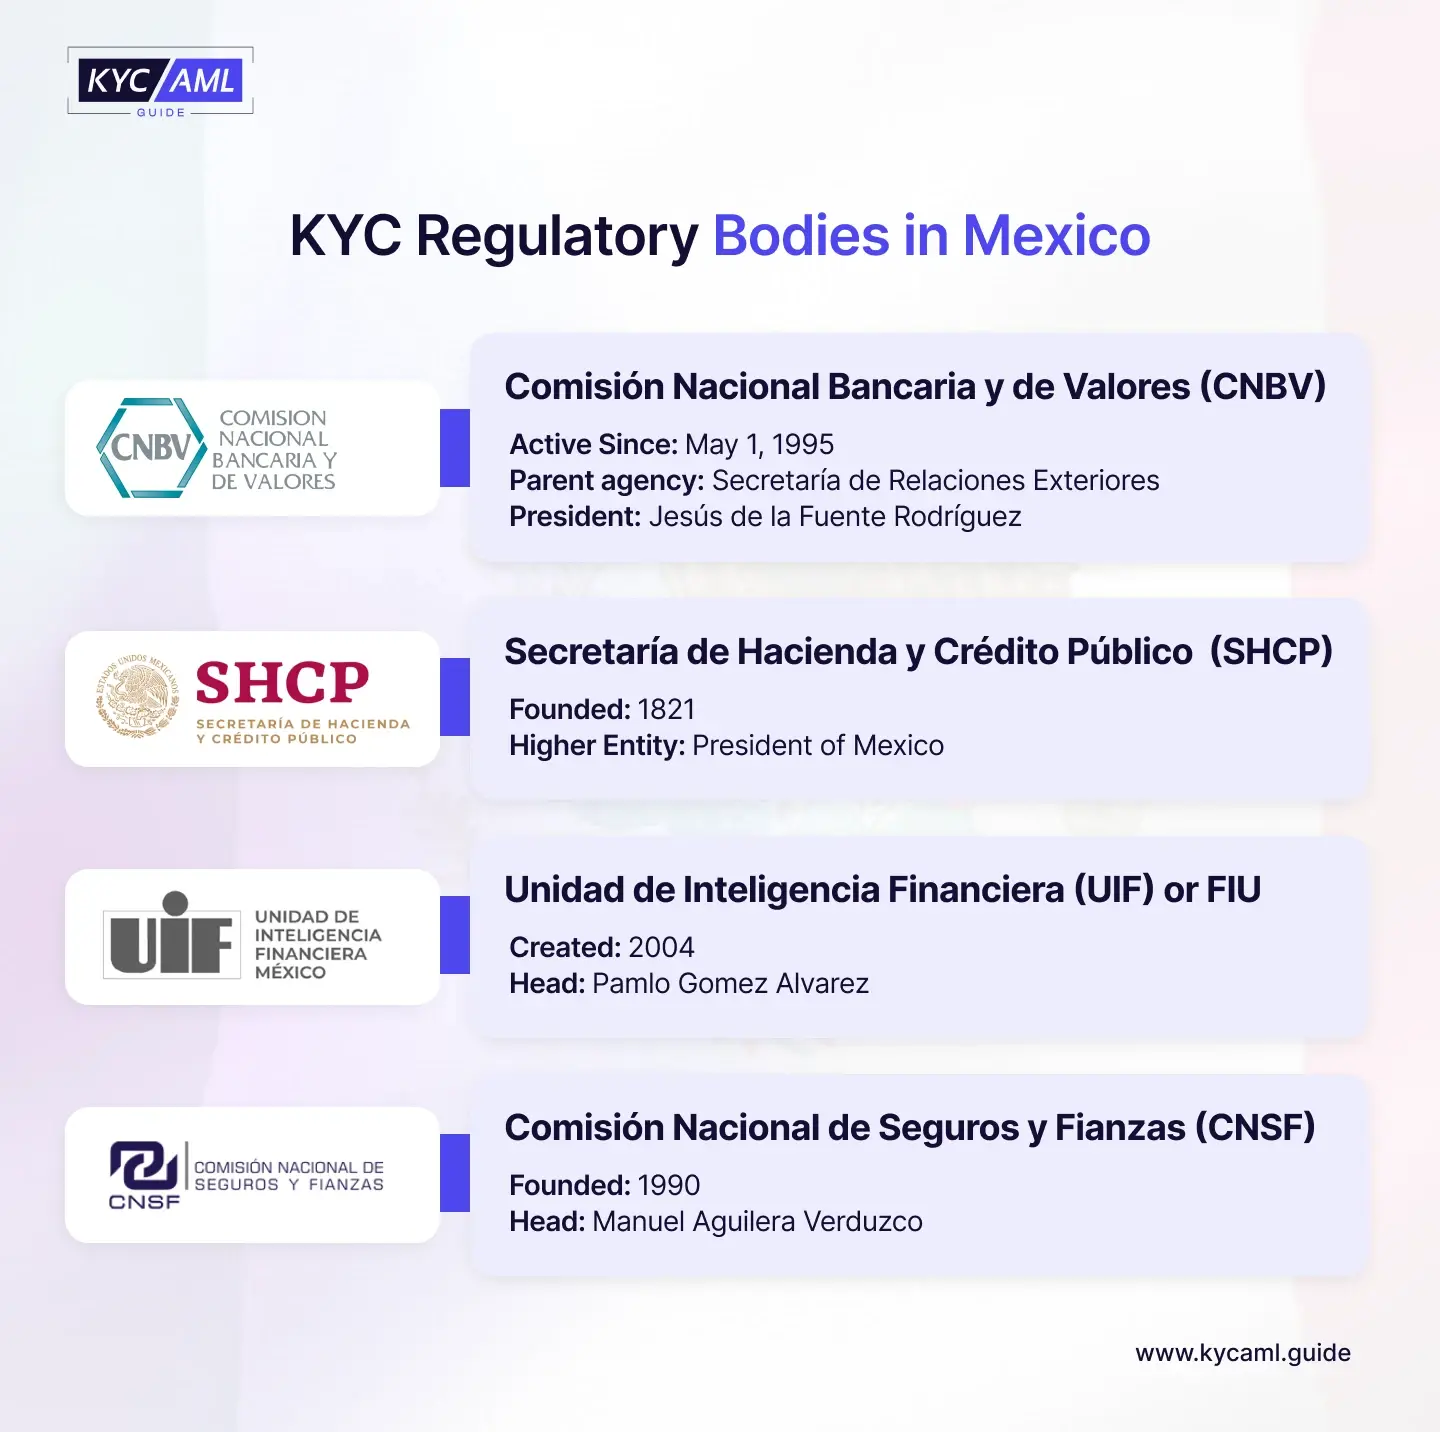 This infographic enlists the KYC and AML regulatory bodies of Mexico including 1) CNBV 2) SHCP 3) UIF 4) CNSF